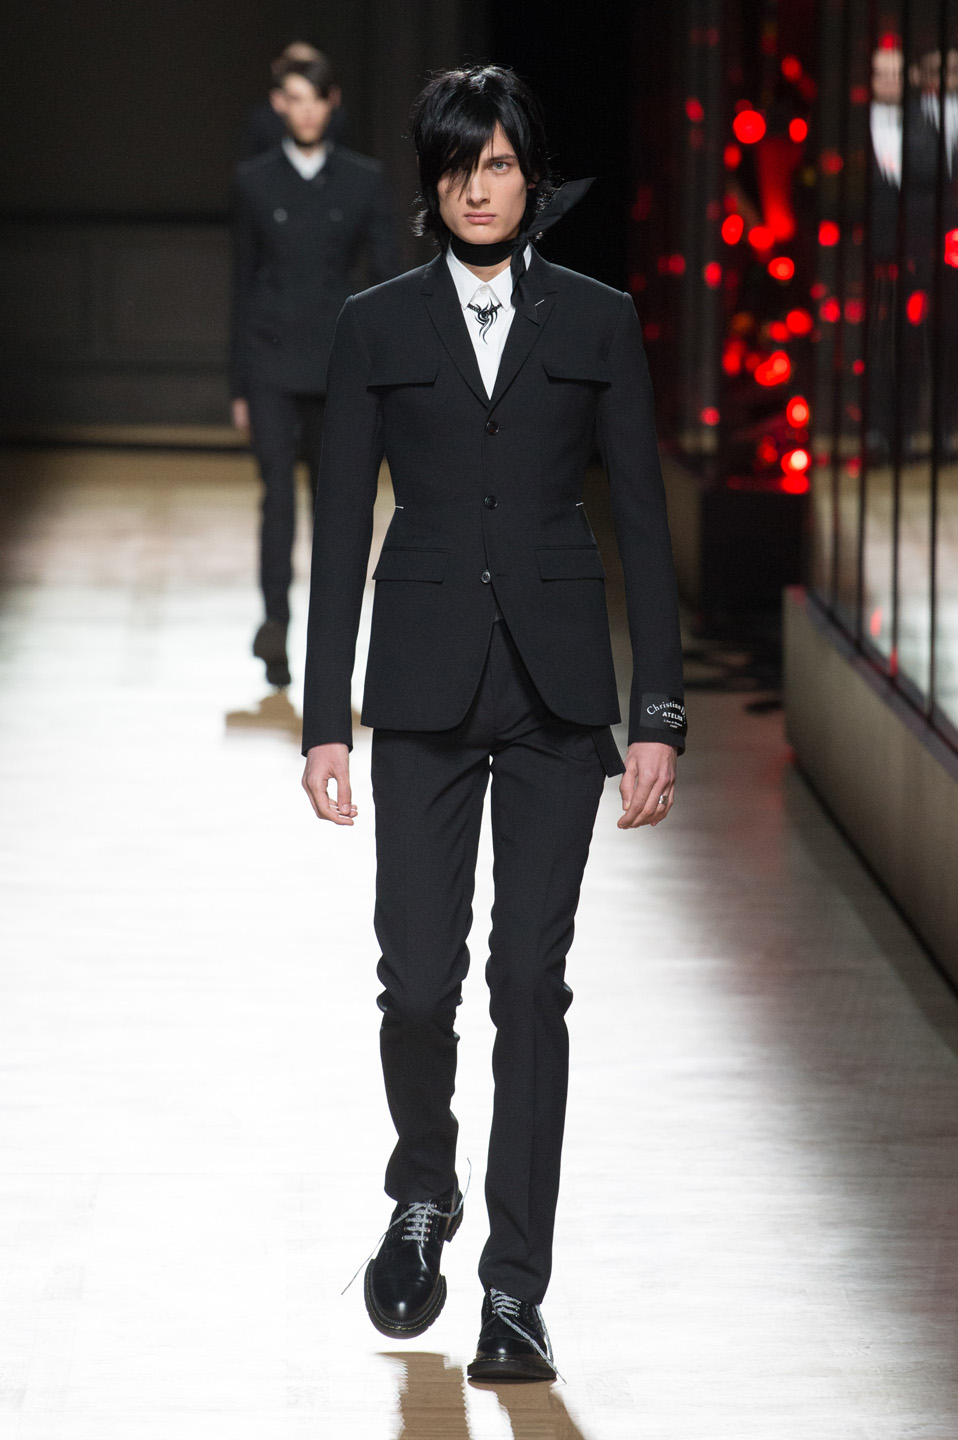 DIOR HOMME WINTER 18 19 BY PATRICE STABLE look03 Fall/WInter 2018 runway